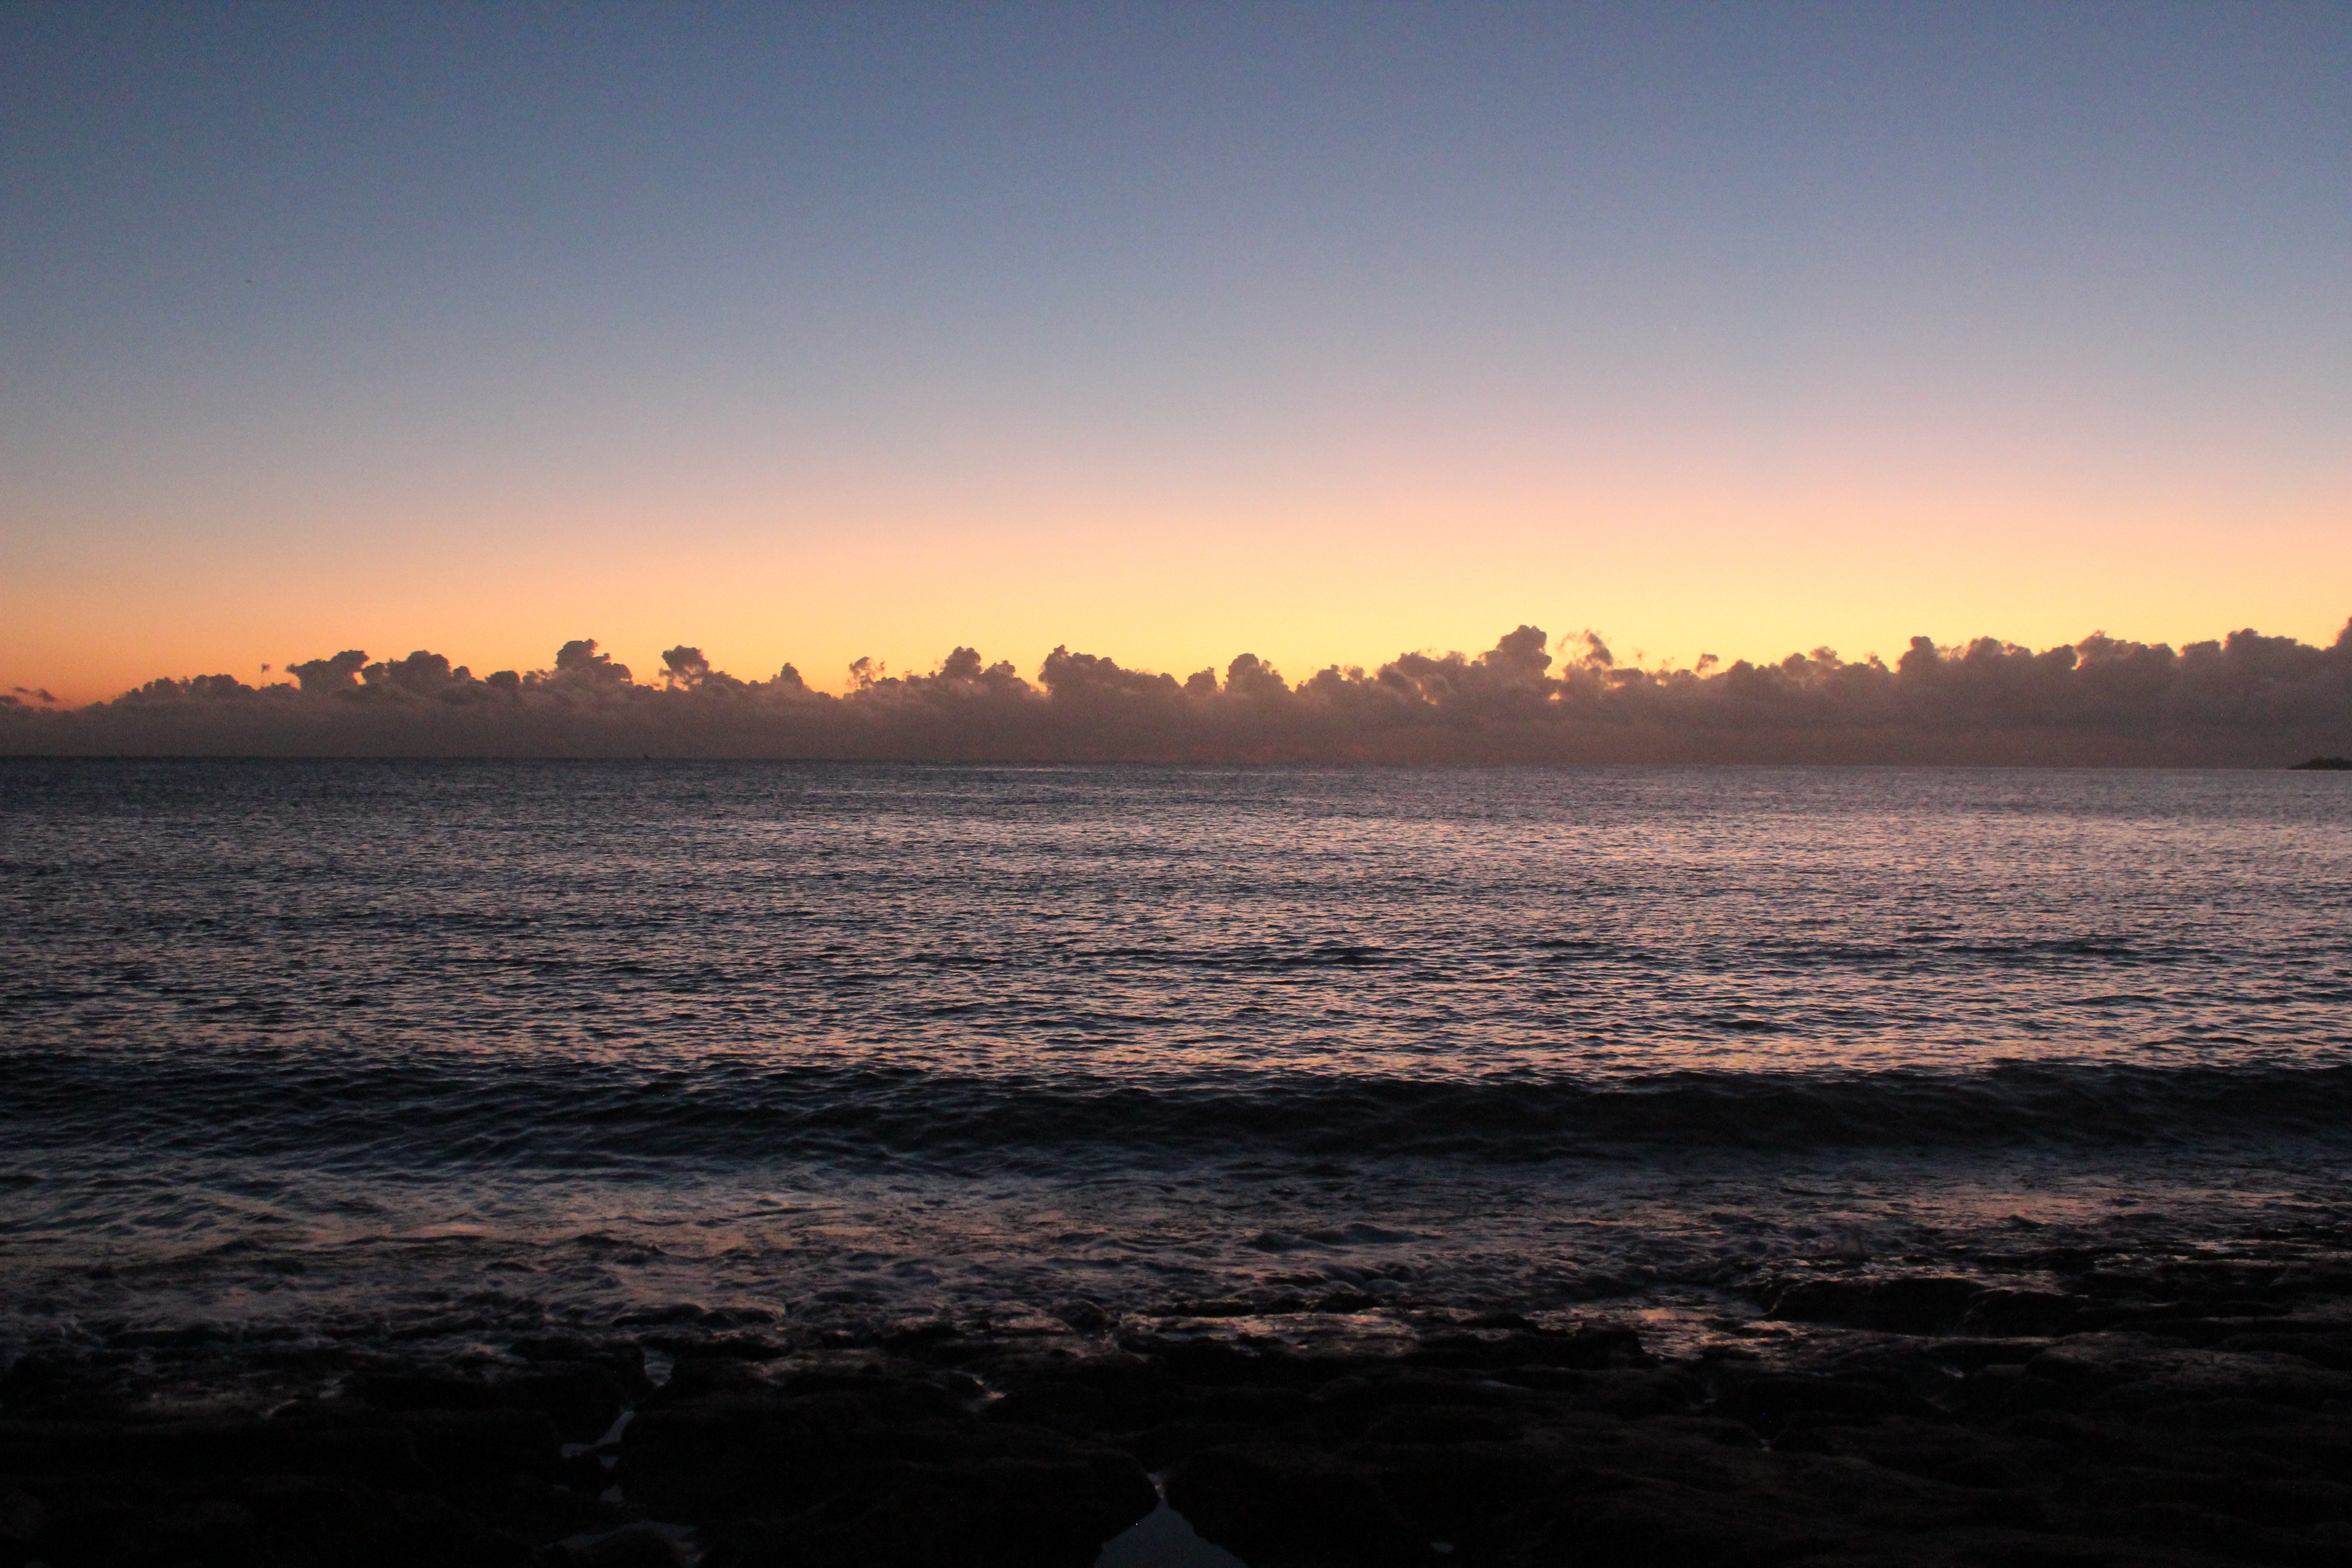 Sunrise on the Indian Ocean, Pemba, Mozambique